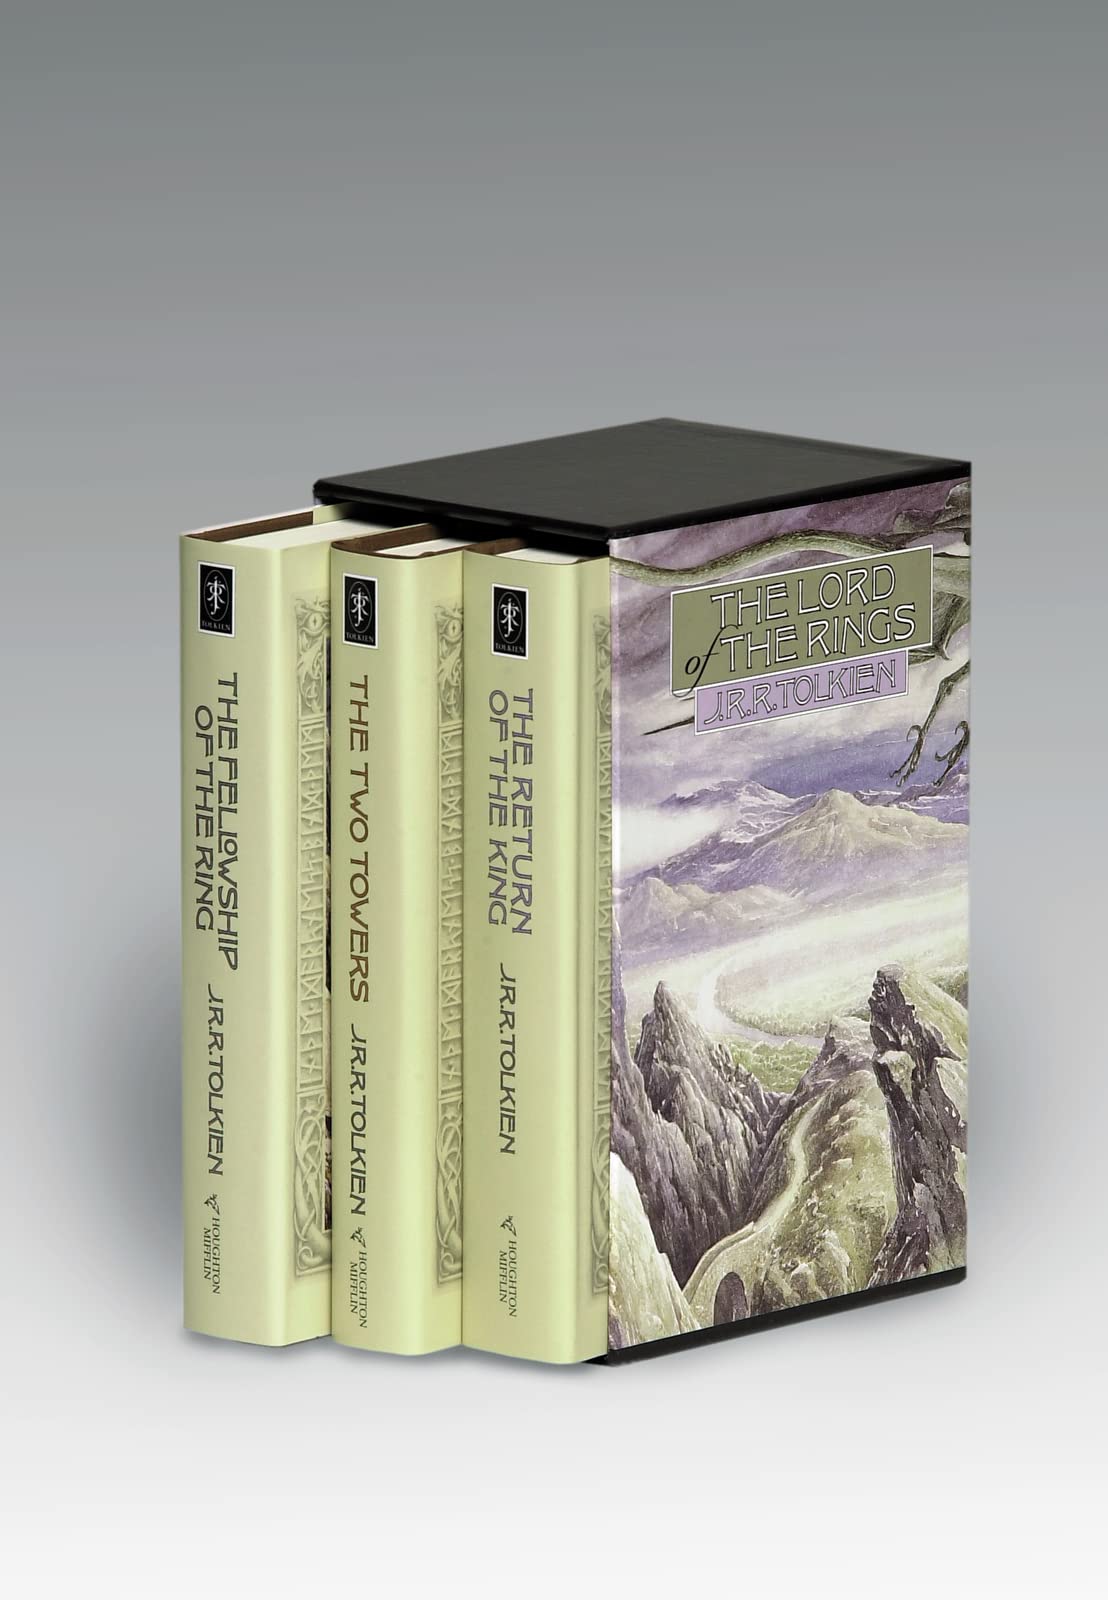 The Lord of the Rings Boxed Set (Lord of the Rings)